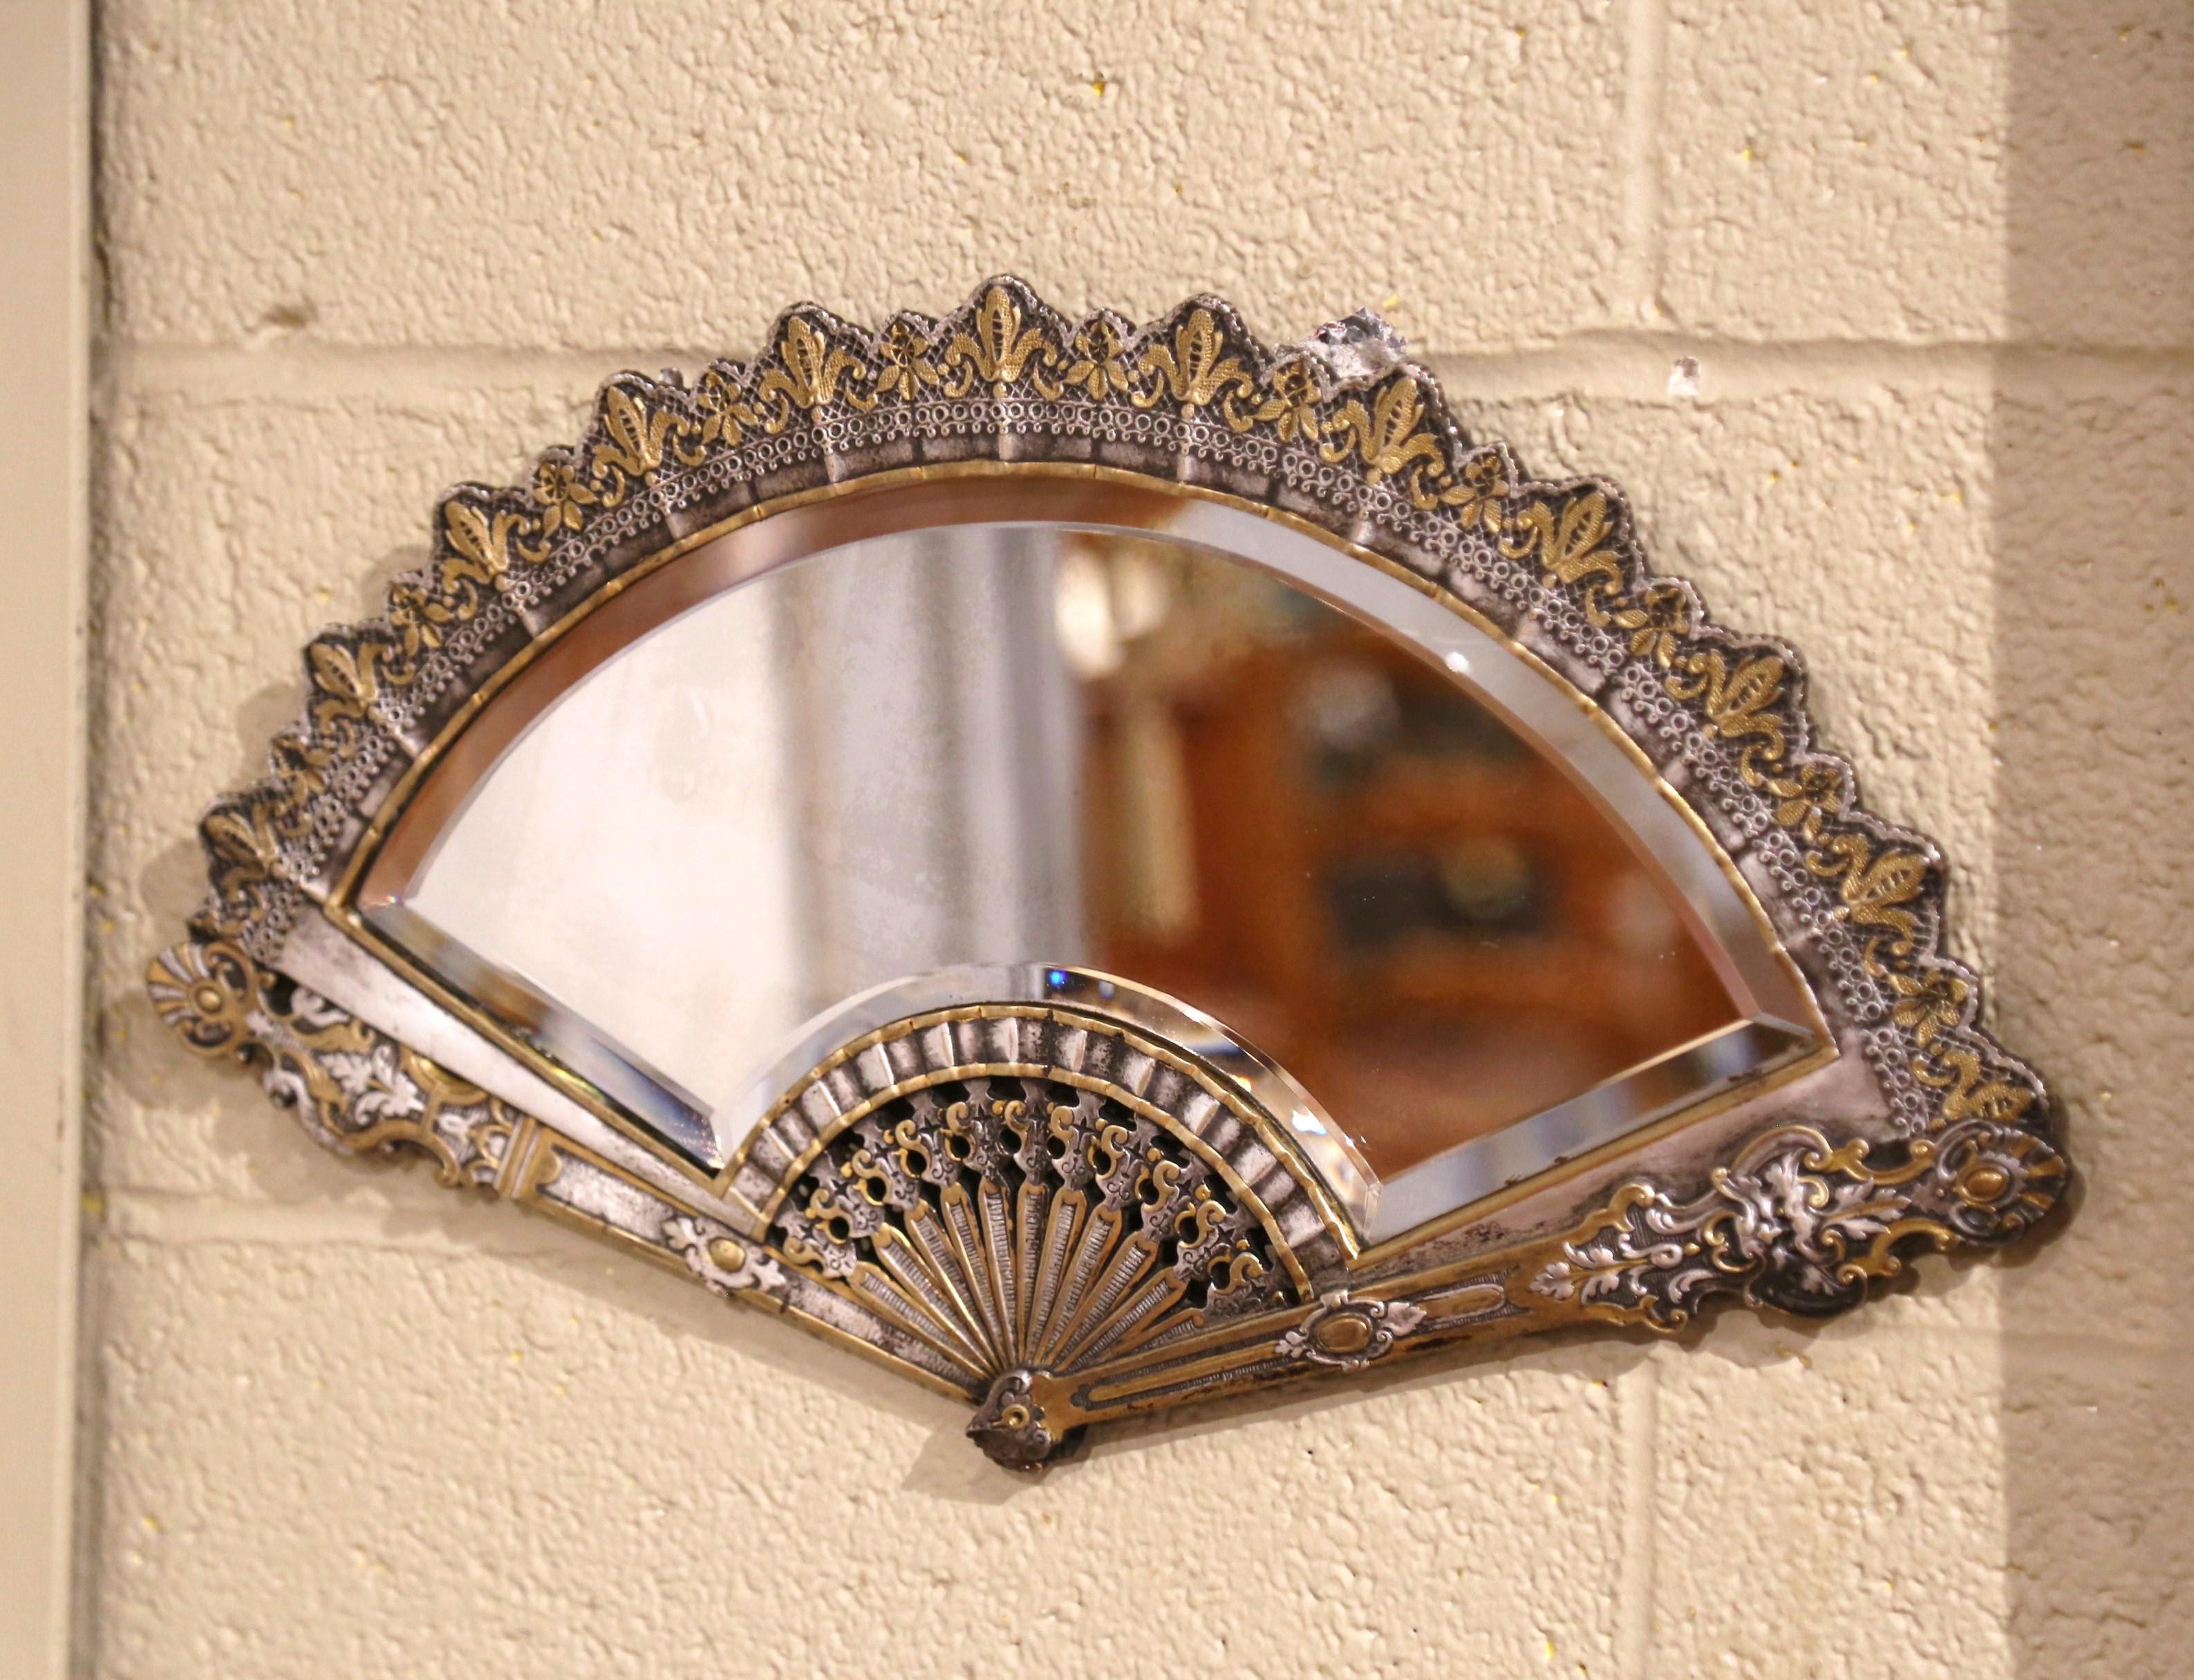 Decorate a wall, a vanity, or dresser with this intricate fan mirror. Crafted in France, circa 1880, and unique in shape, this heavy bronze features finely chiseled gilt detailing throughout. The wall hanging mirror is in excellent condition